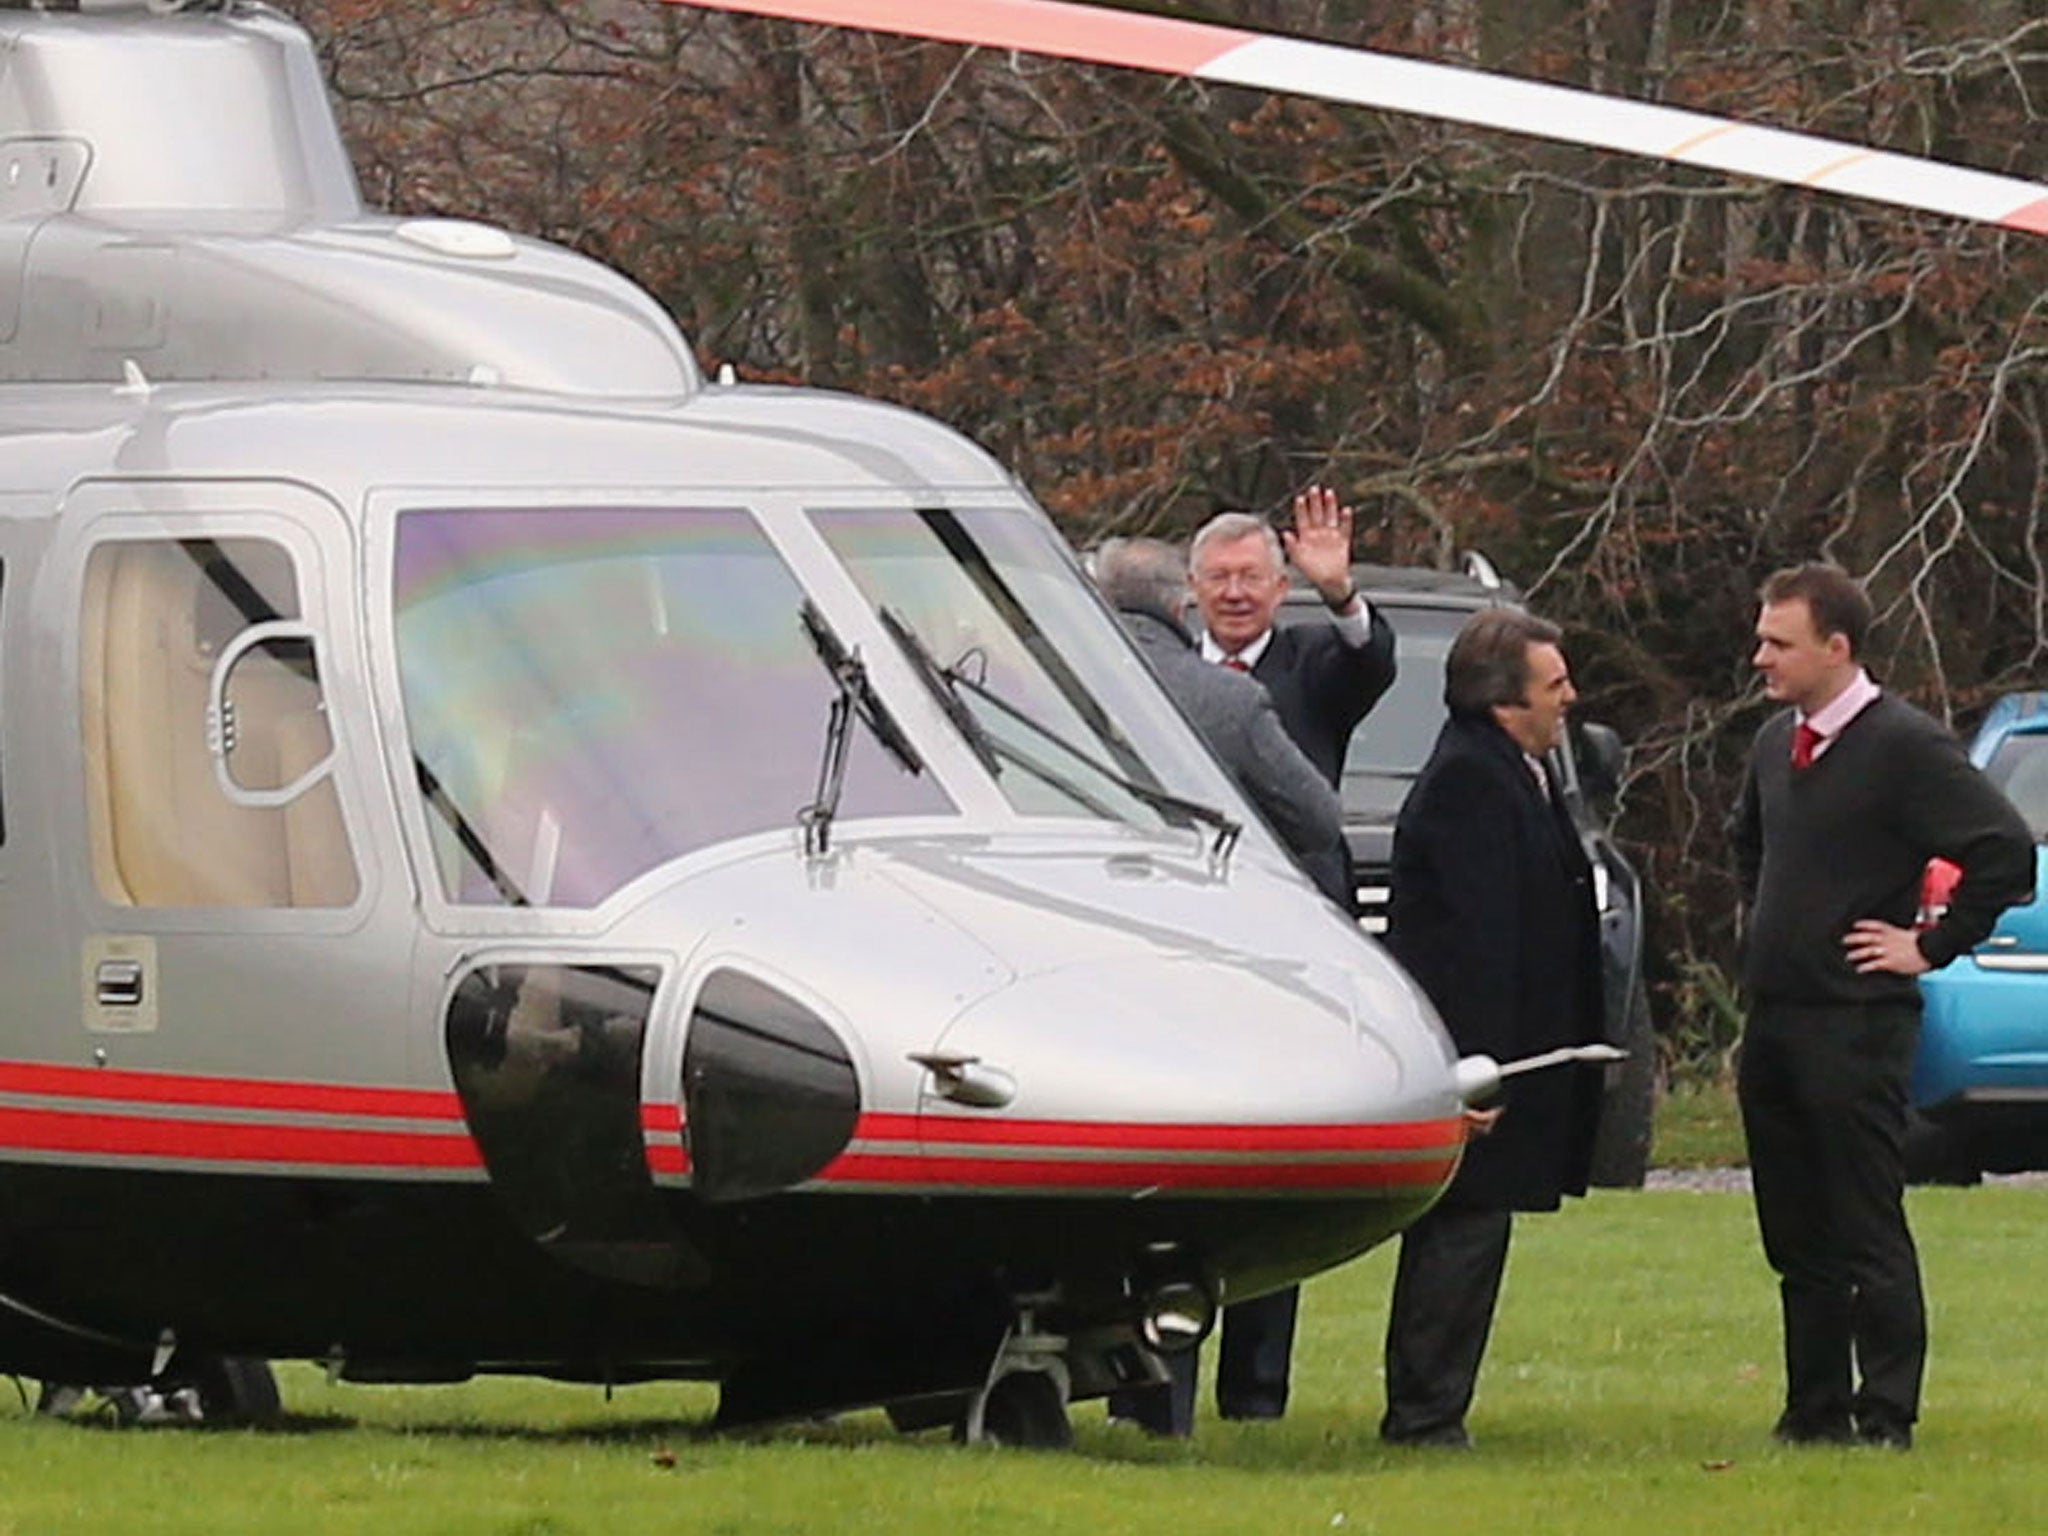 Sir Alex Ferguson former manager of Manchester United arrives by helicopter ahead of the FA Cup third round match between Yeovil Town and Manchester United at Huish Park